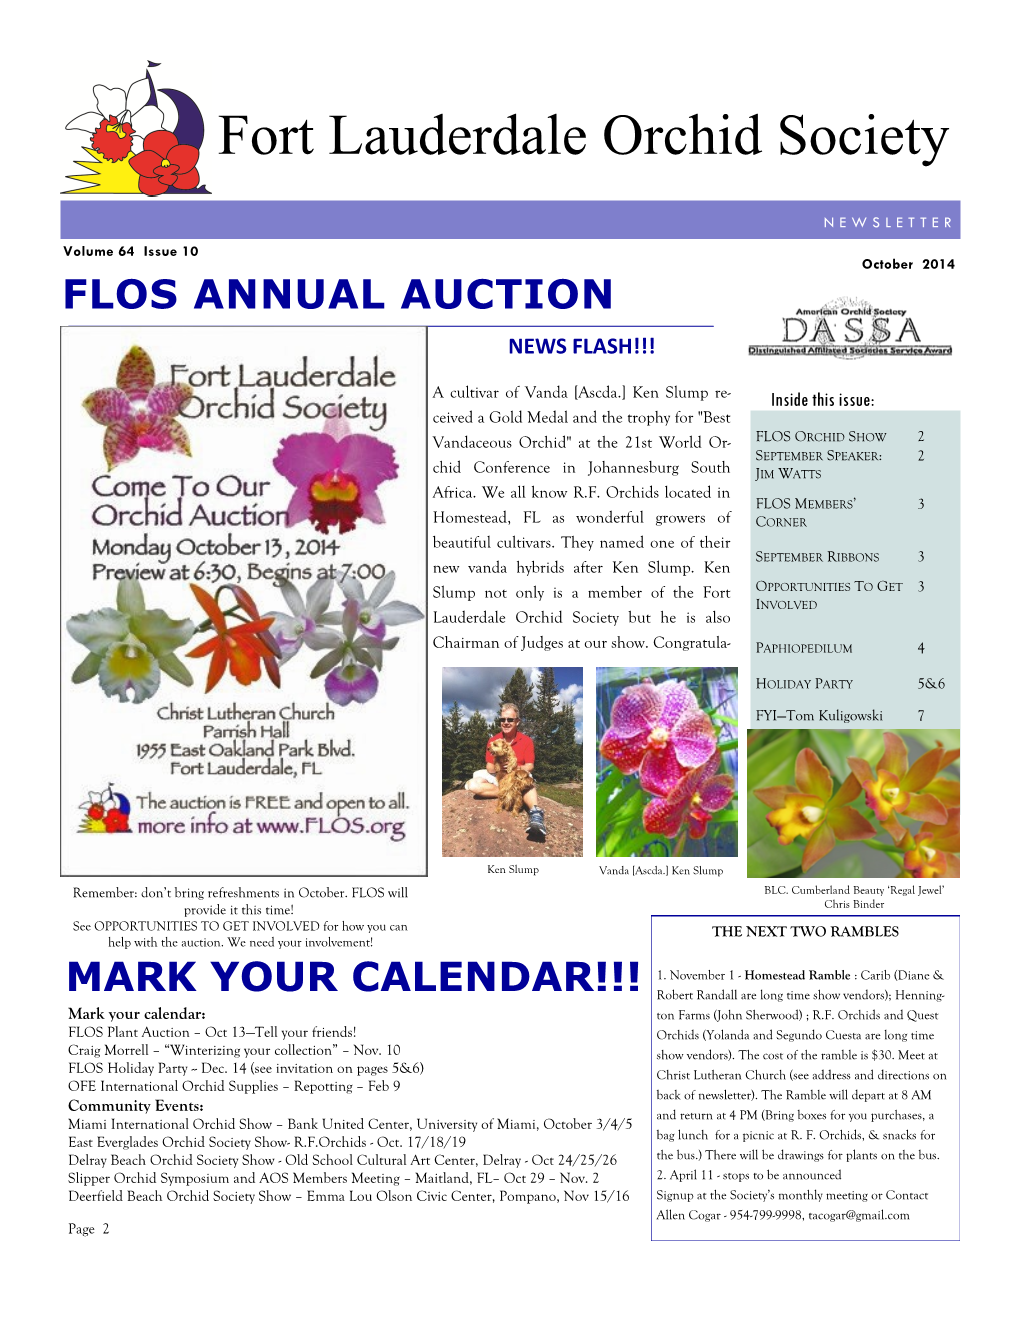 October 2014 FLOS ANNUAL AUCTION NEWS FLASH!!!